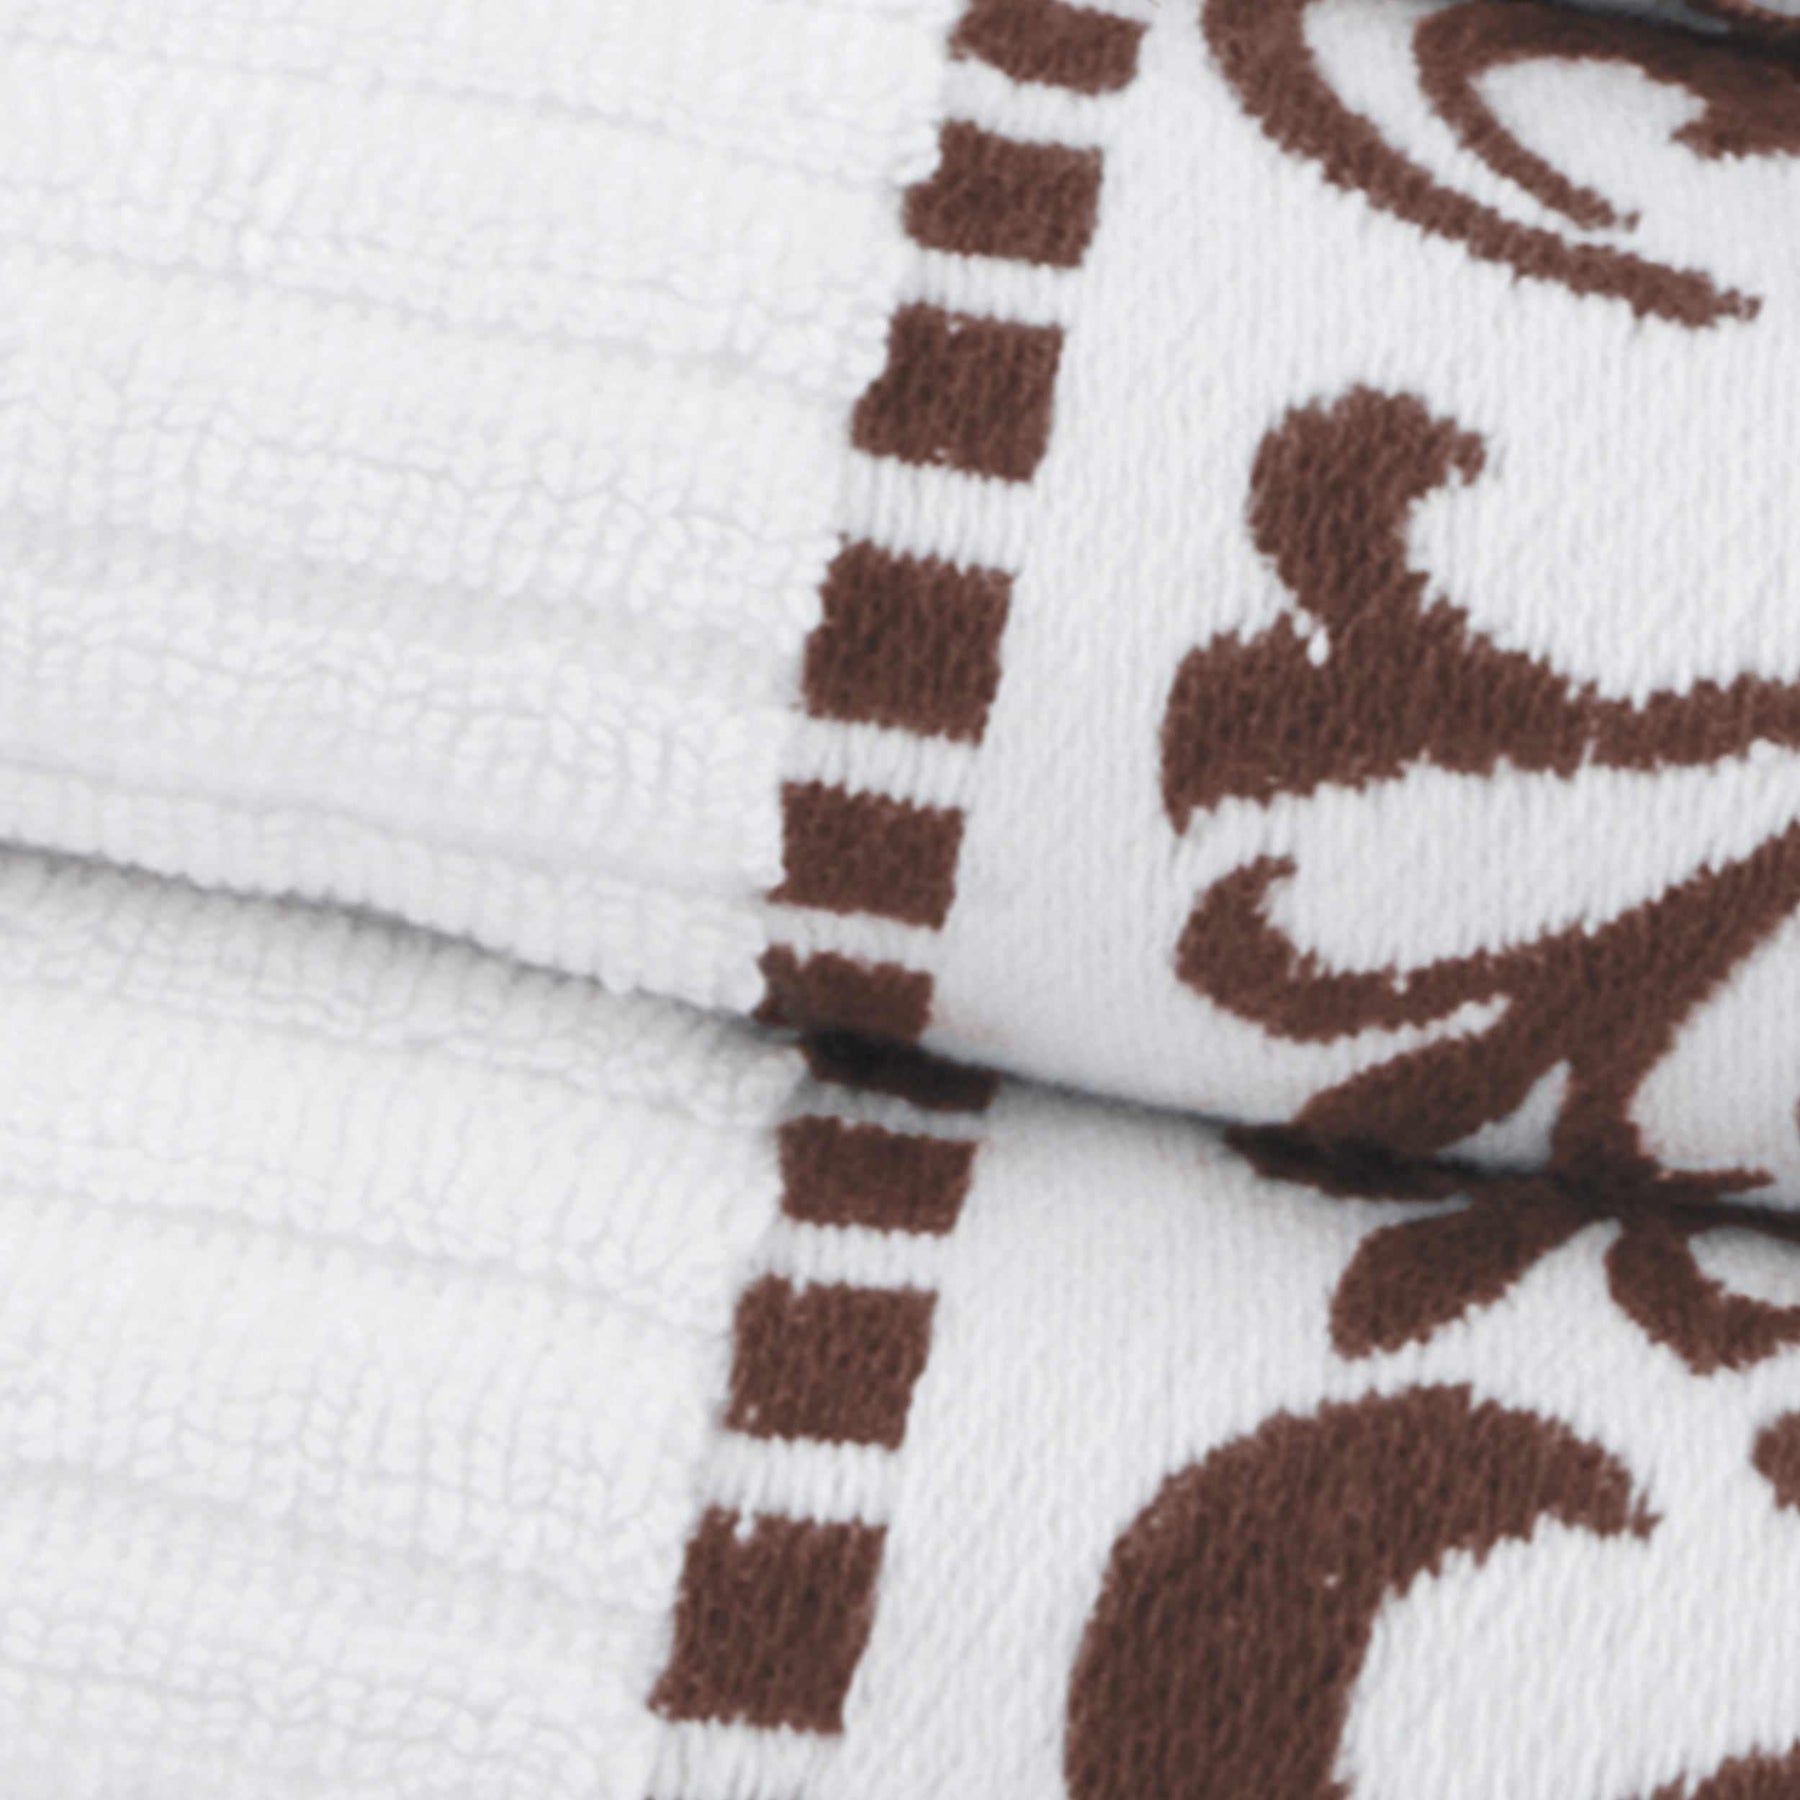 Superior Athens Cotton 8-Piece Towel Set with Greek Scroll and Floral Pattern - White-Chocolate